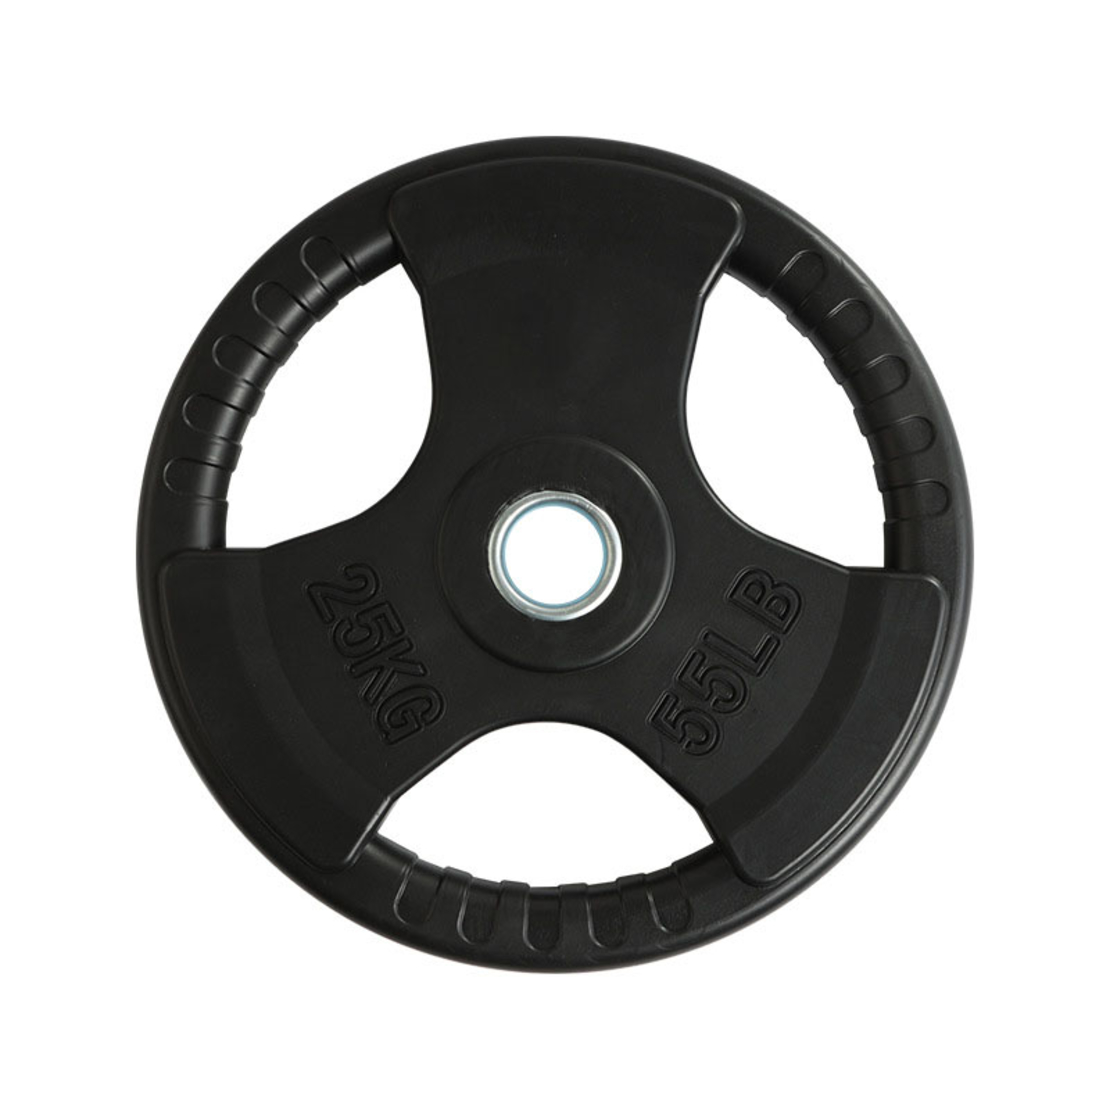  weight plate 10 kg